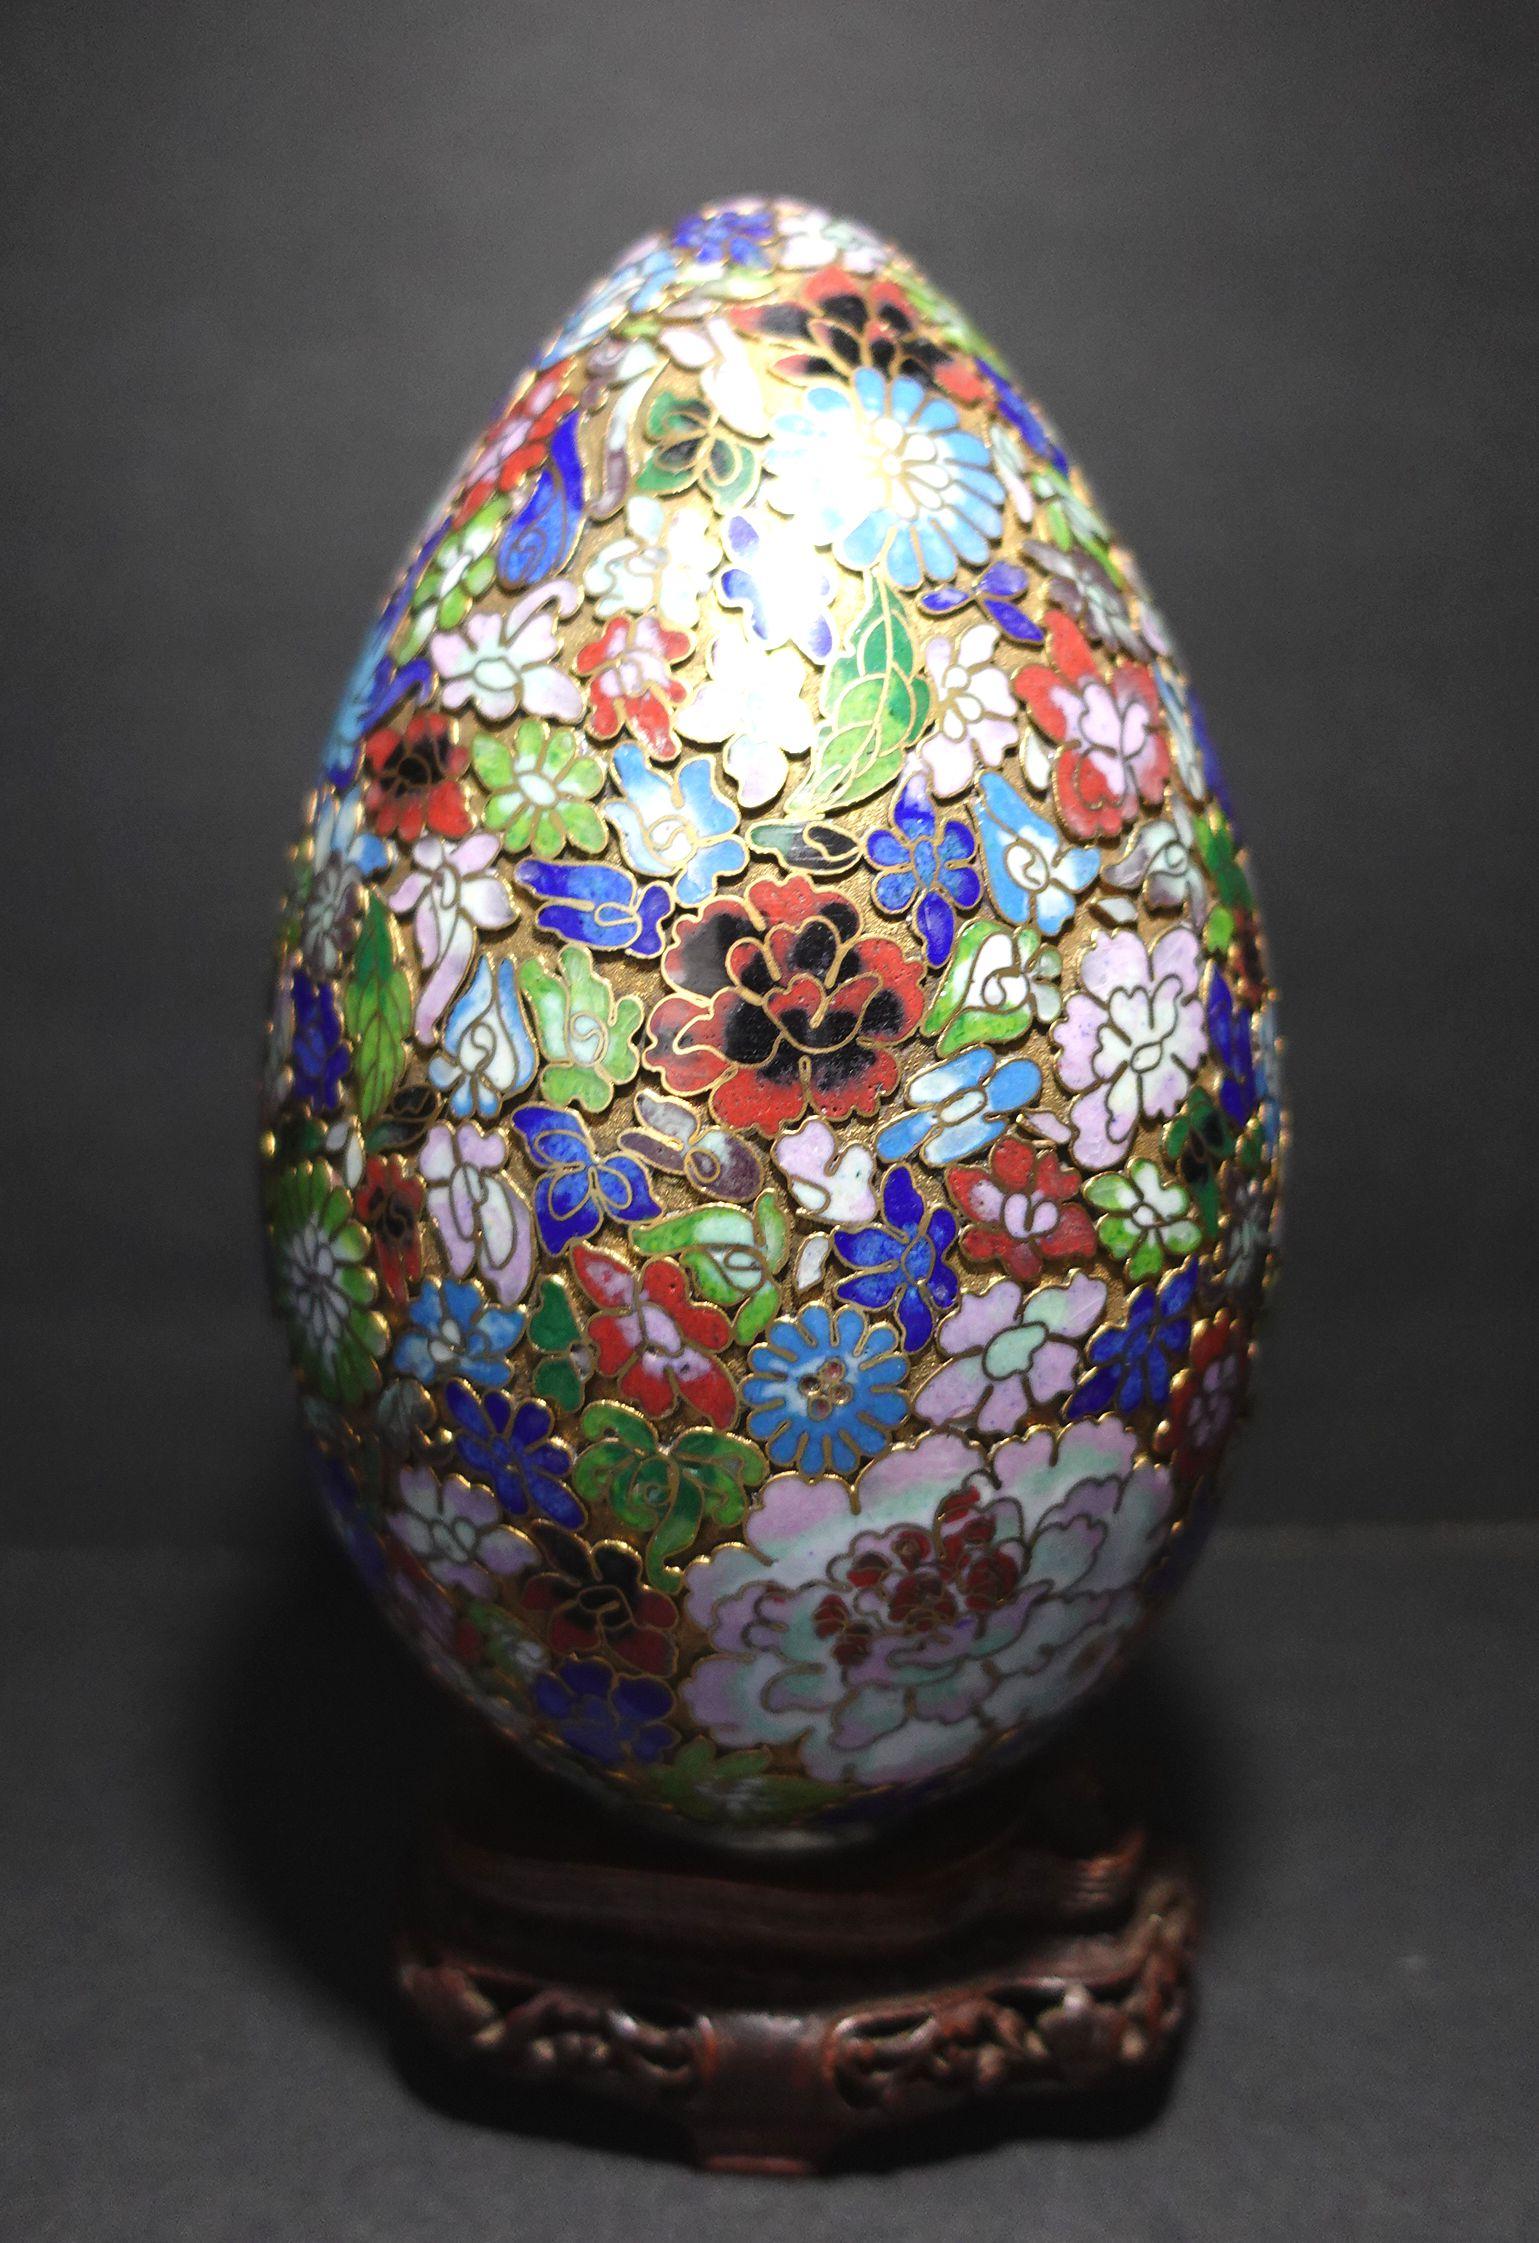 Presenting a very large and beautiful Chinese cloisonné enamel egg with intricated patterns made by hand seating on a wood stand, early 20 century. It's measured about 4 1/2